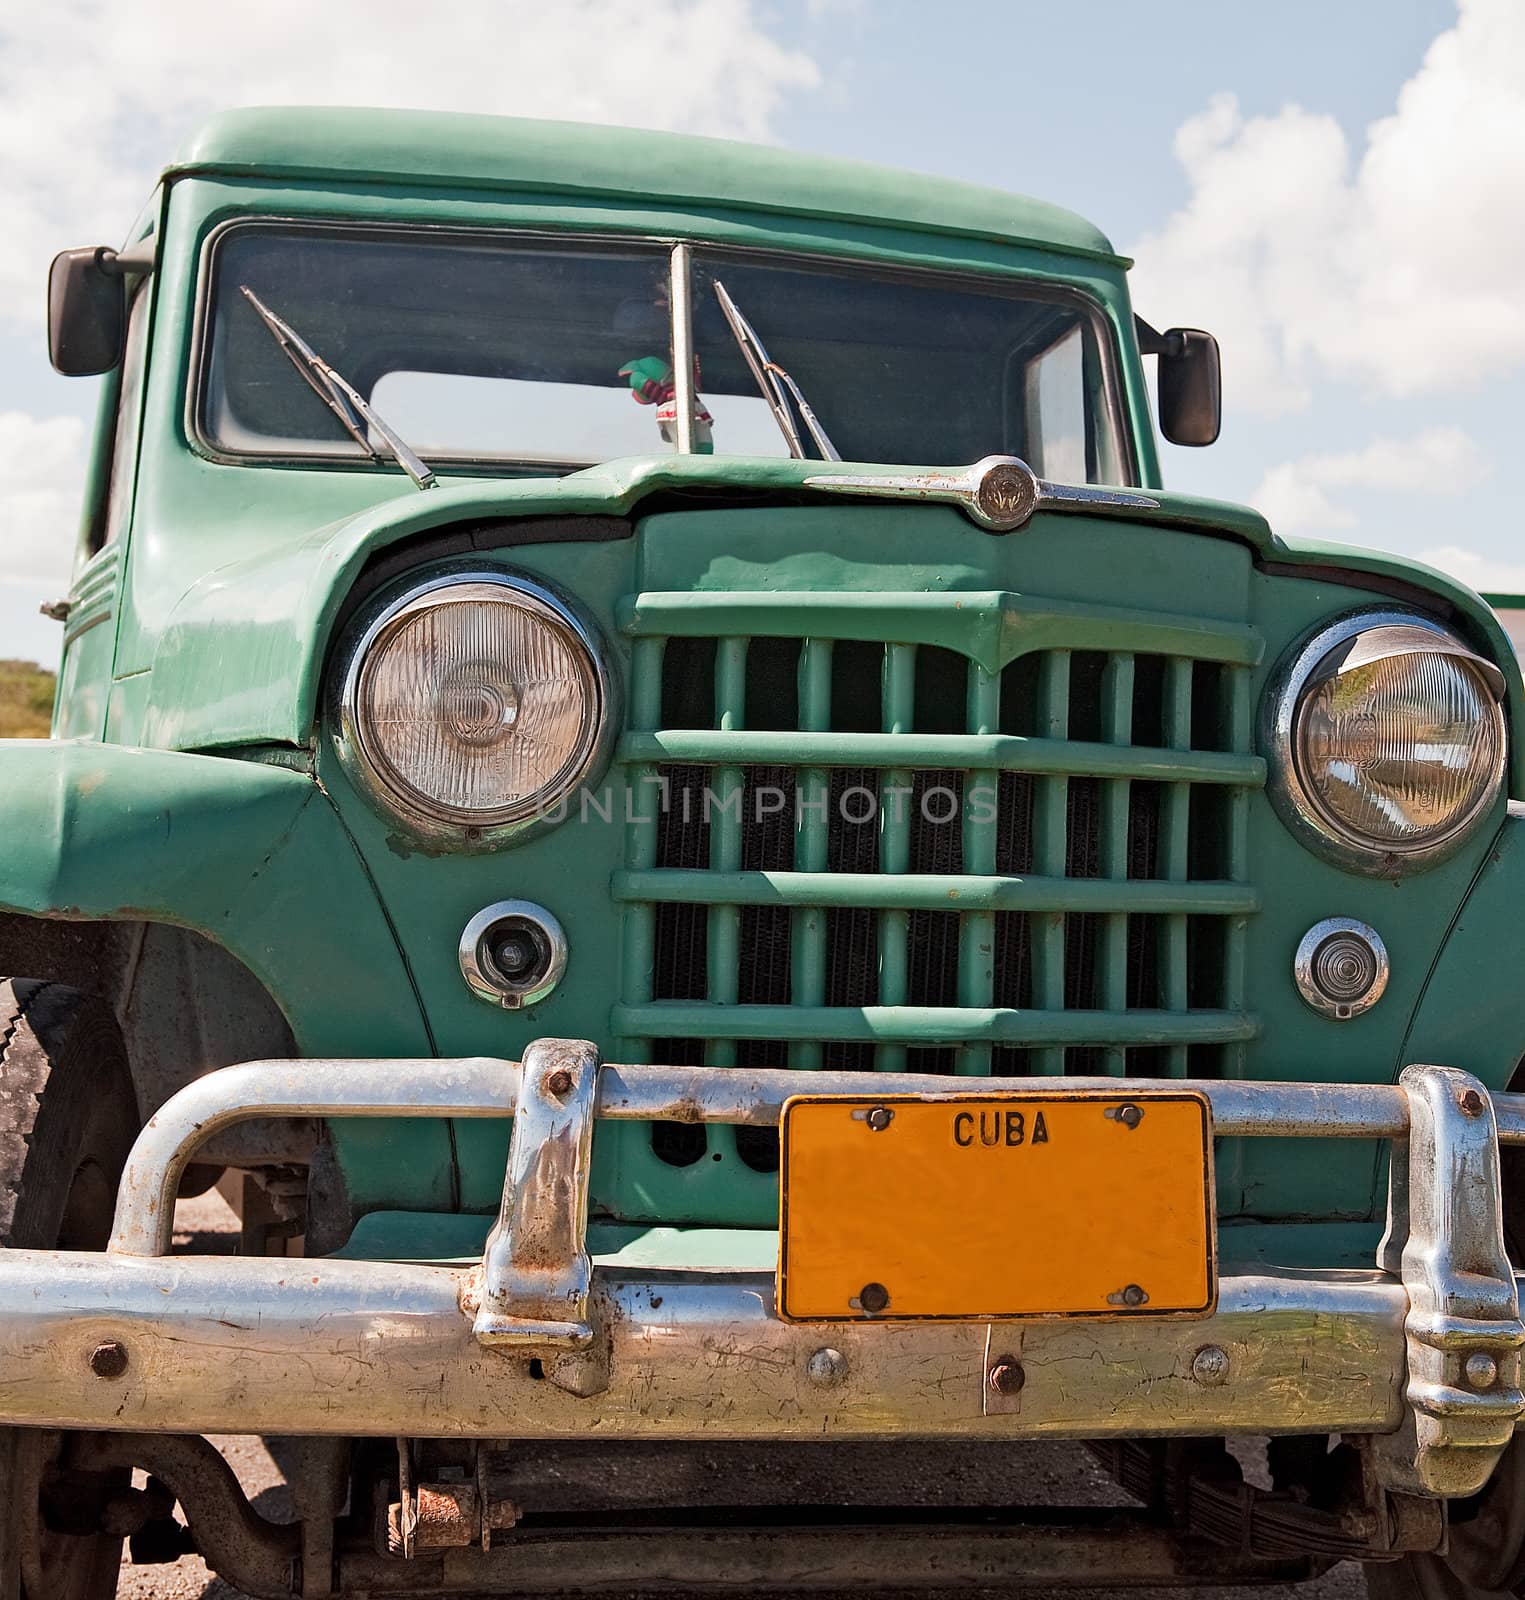 Classic green truck front view with cuba licence plate